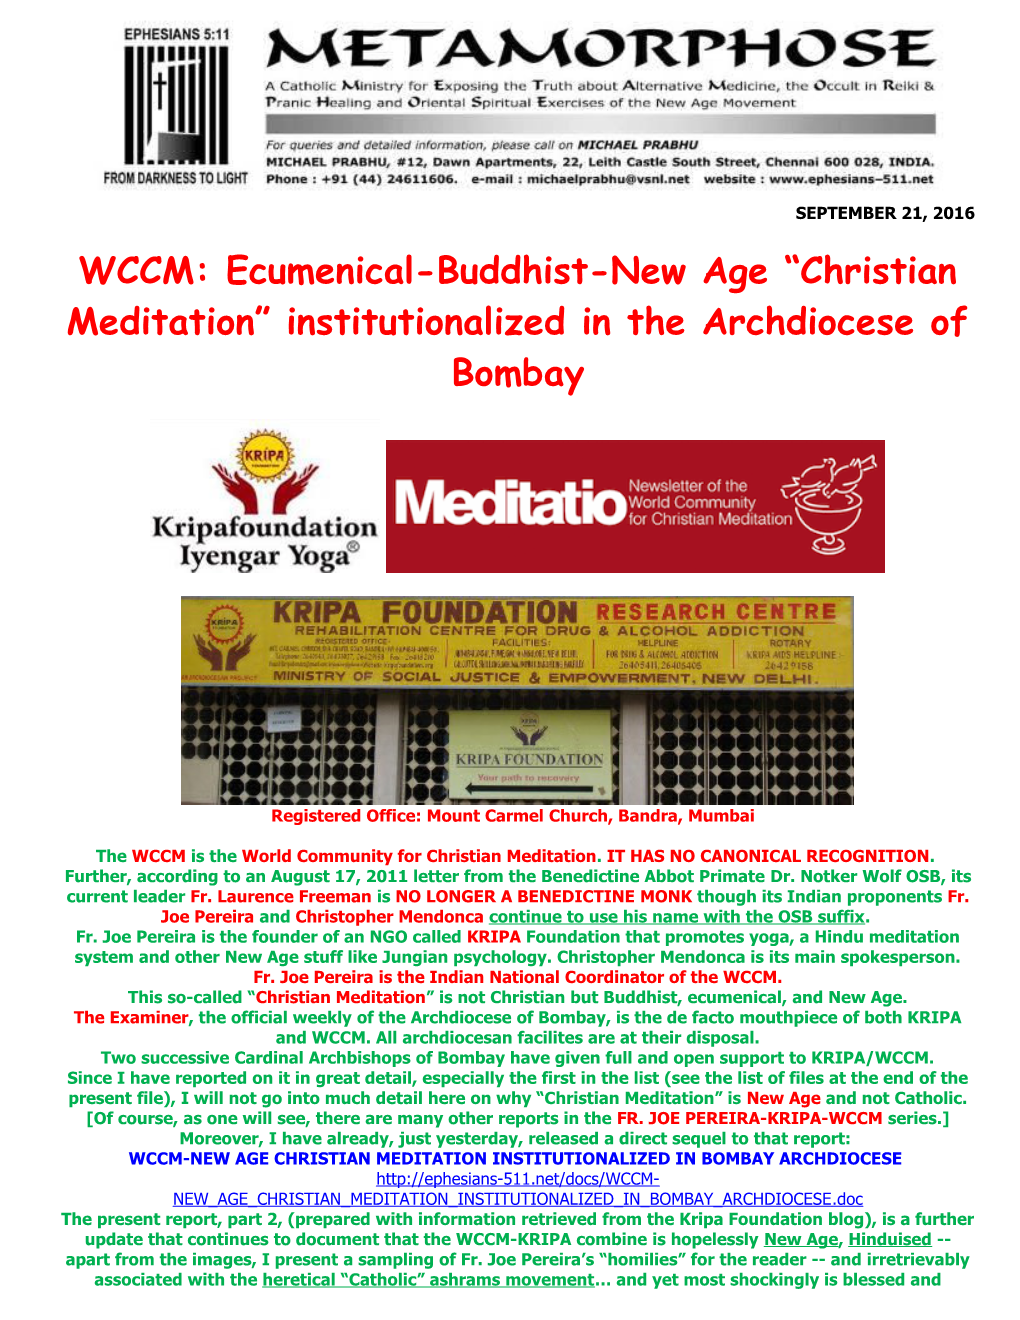 WCCM: Ecumenical-Buddhist-New Age Christian Meditation Institutionalized in the Archdiocese